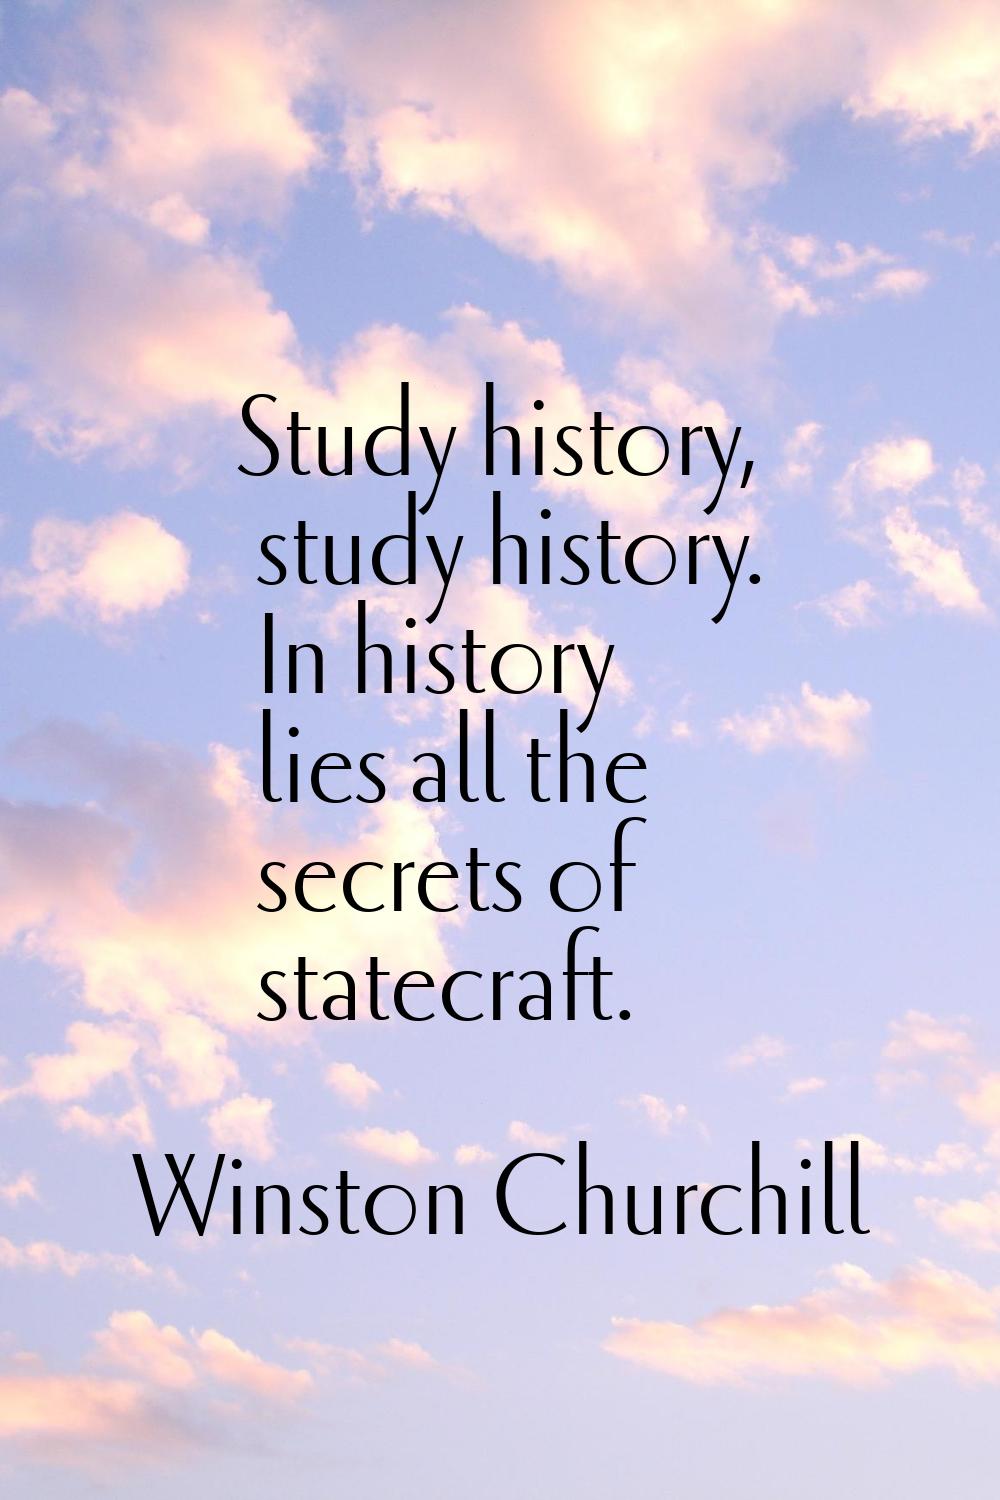 Study history, study history. In history lies all the secrets of statecraft.